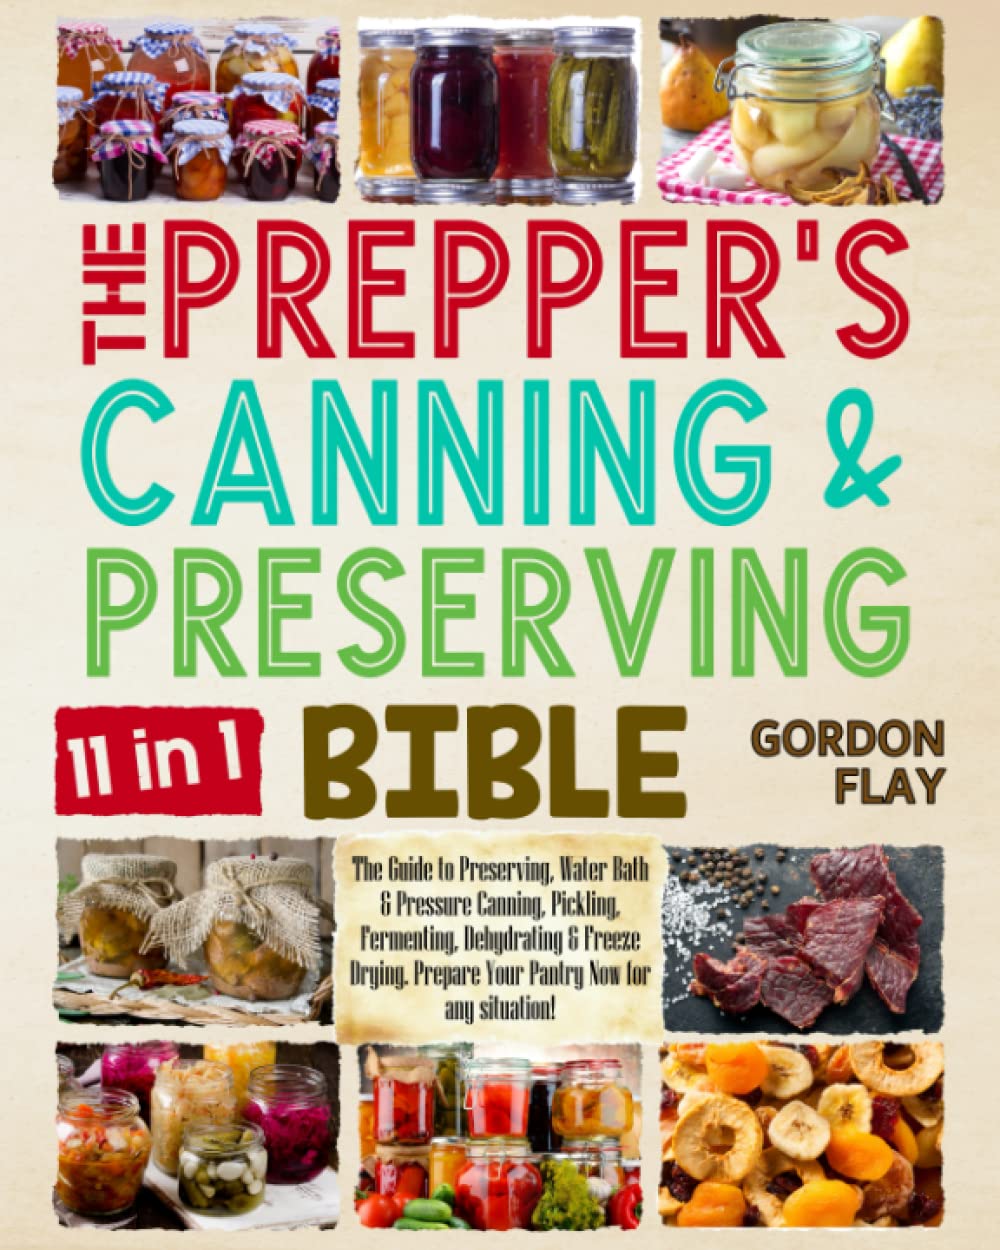 The Prepper’s Canning & Preserving Bible: The Guide to Preserving, Water Bath & Pressure Canning, Pickling, Fermenting, Dehydrating & Freeze Drying. Prepare Your Pantry Now for any Situation!